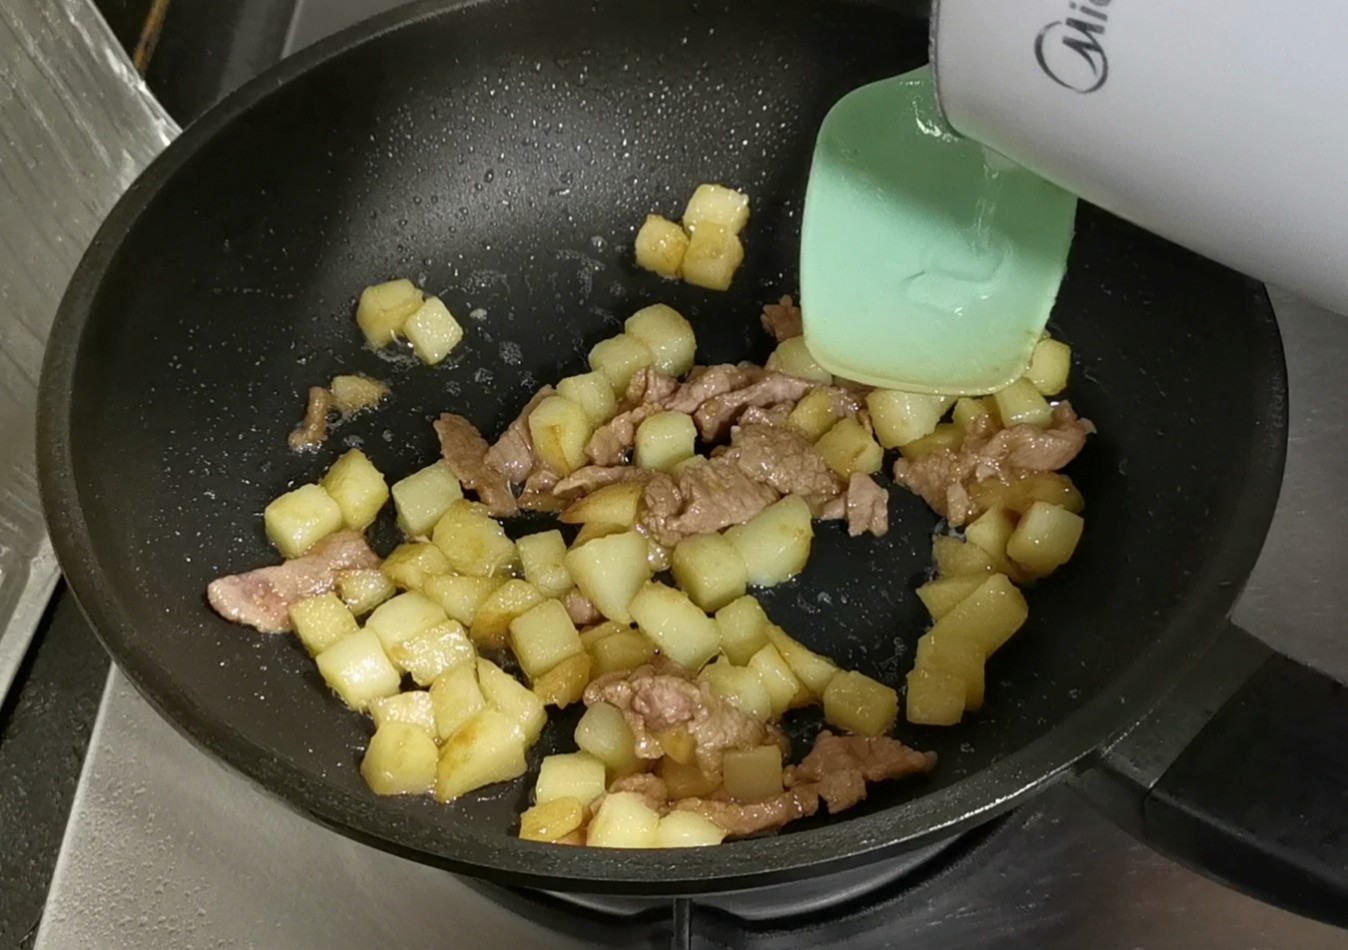 Stir-fried Beef with Potatoes recipe